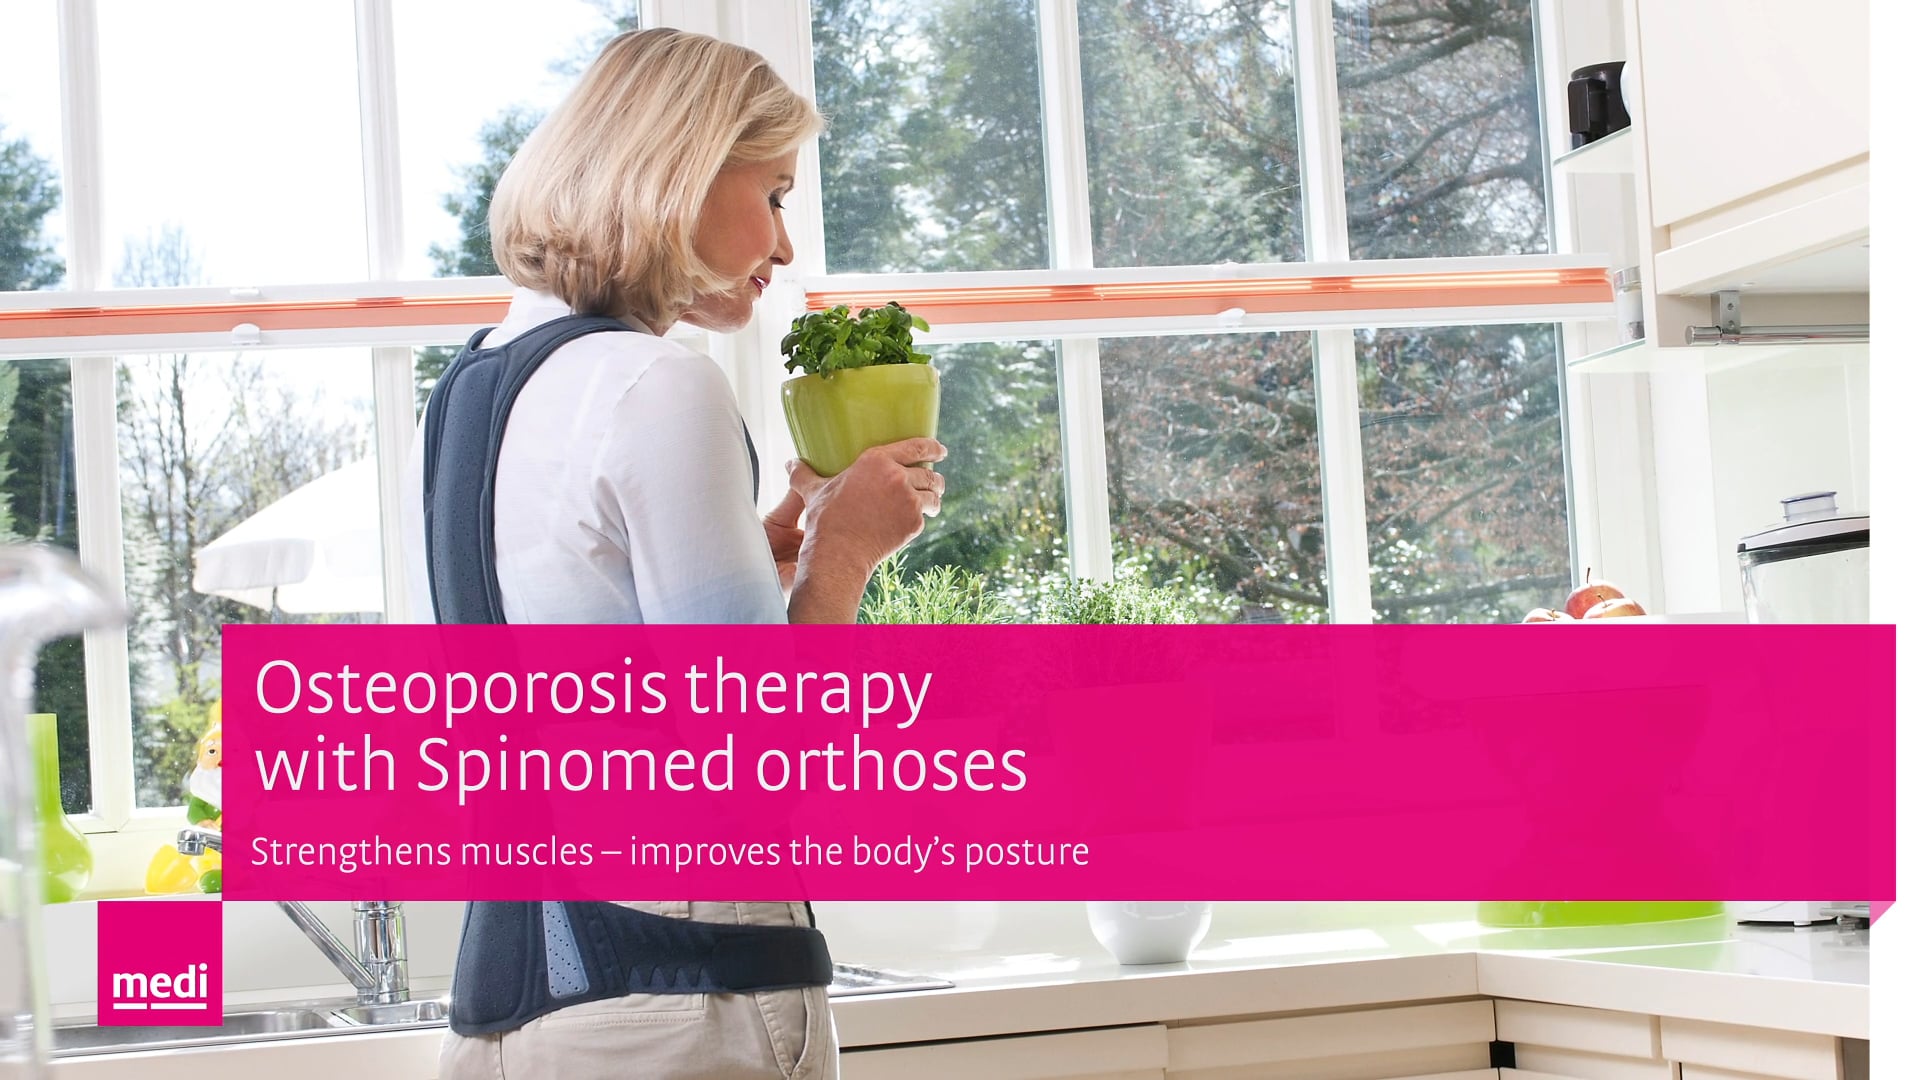 Osteoporosis therapy with Spinomed® orthoses